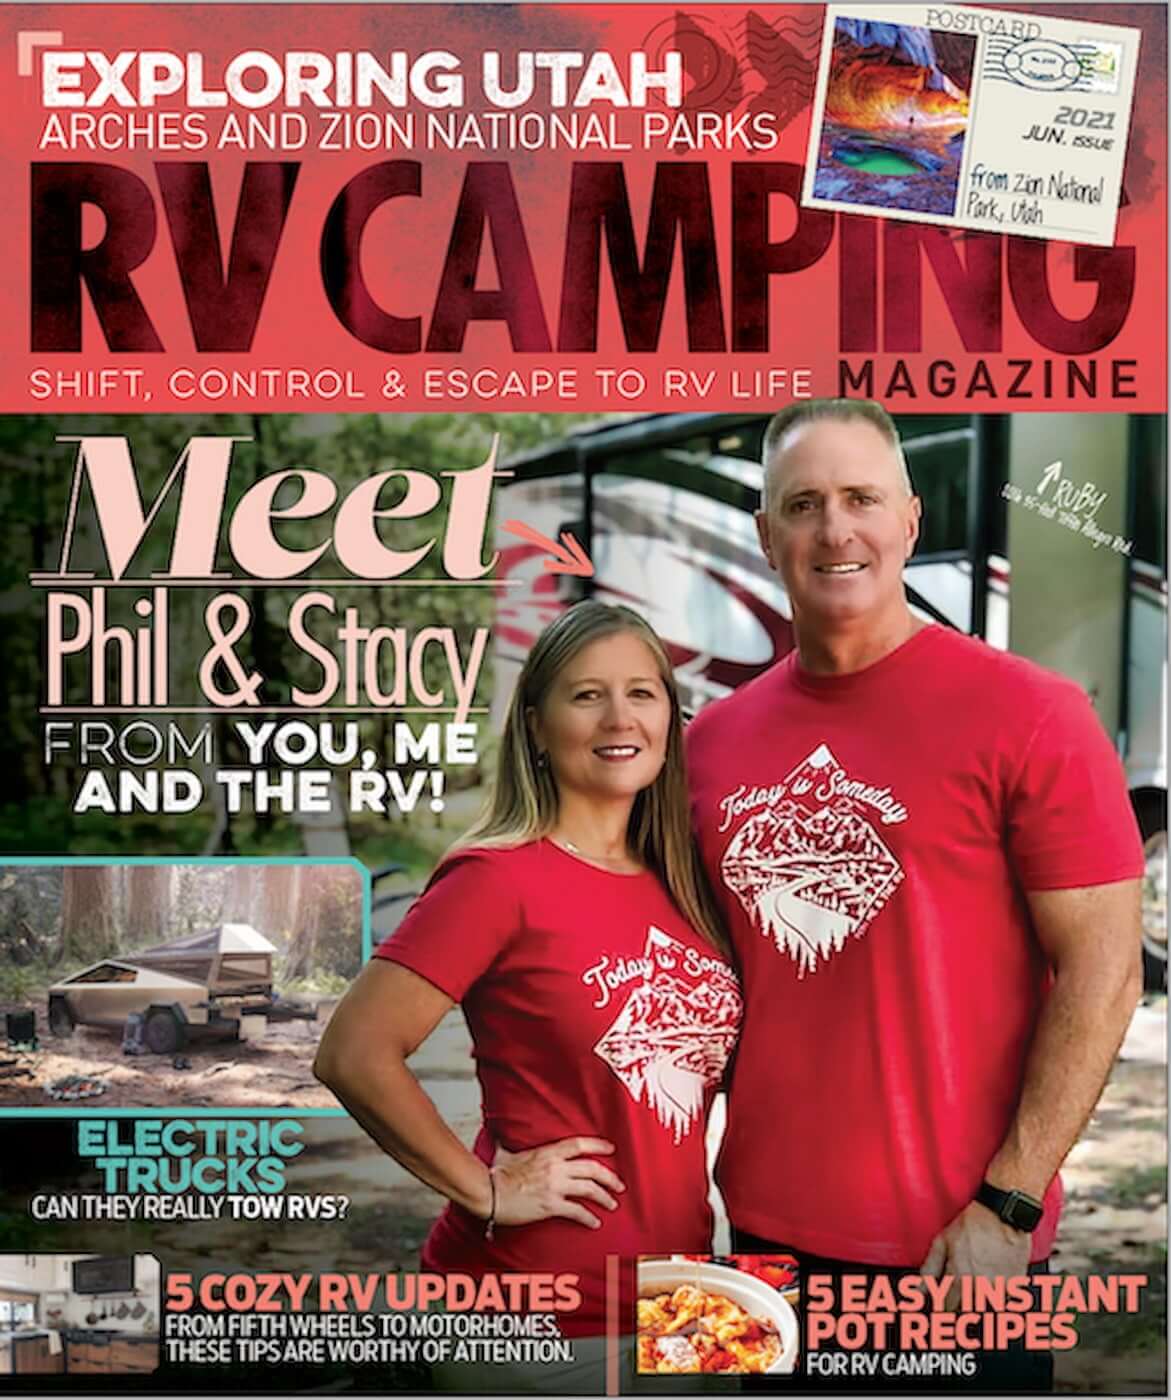 RV Camping Magazine cover featuring couple and Utah parks.